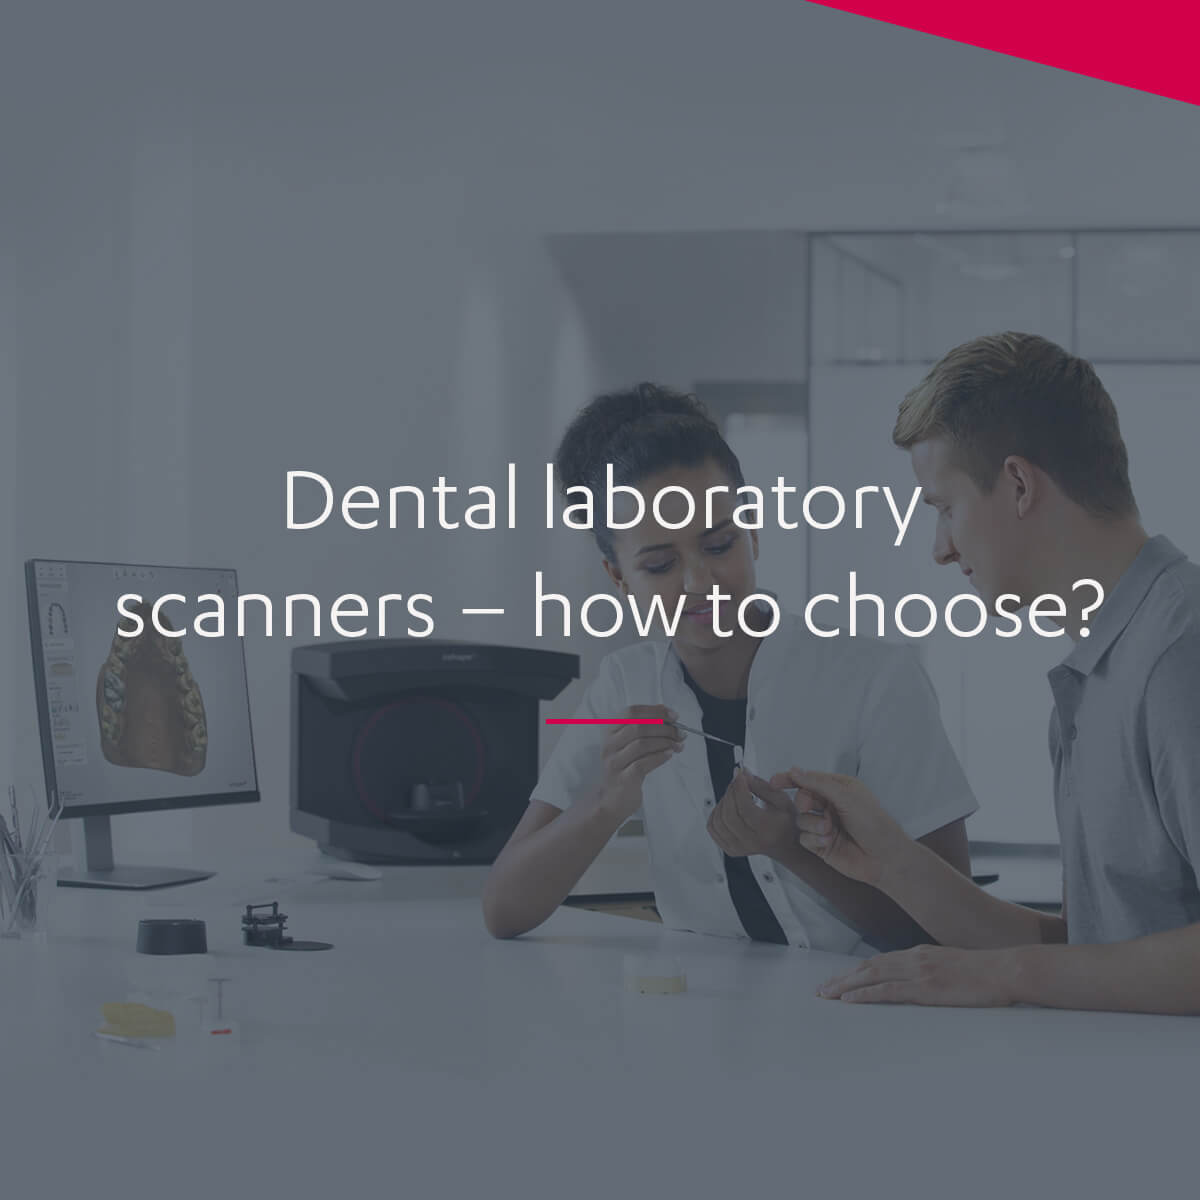 Dental laboratory scanners — features and benefits